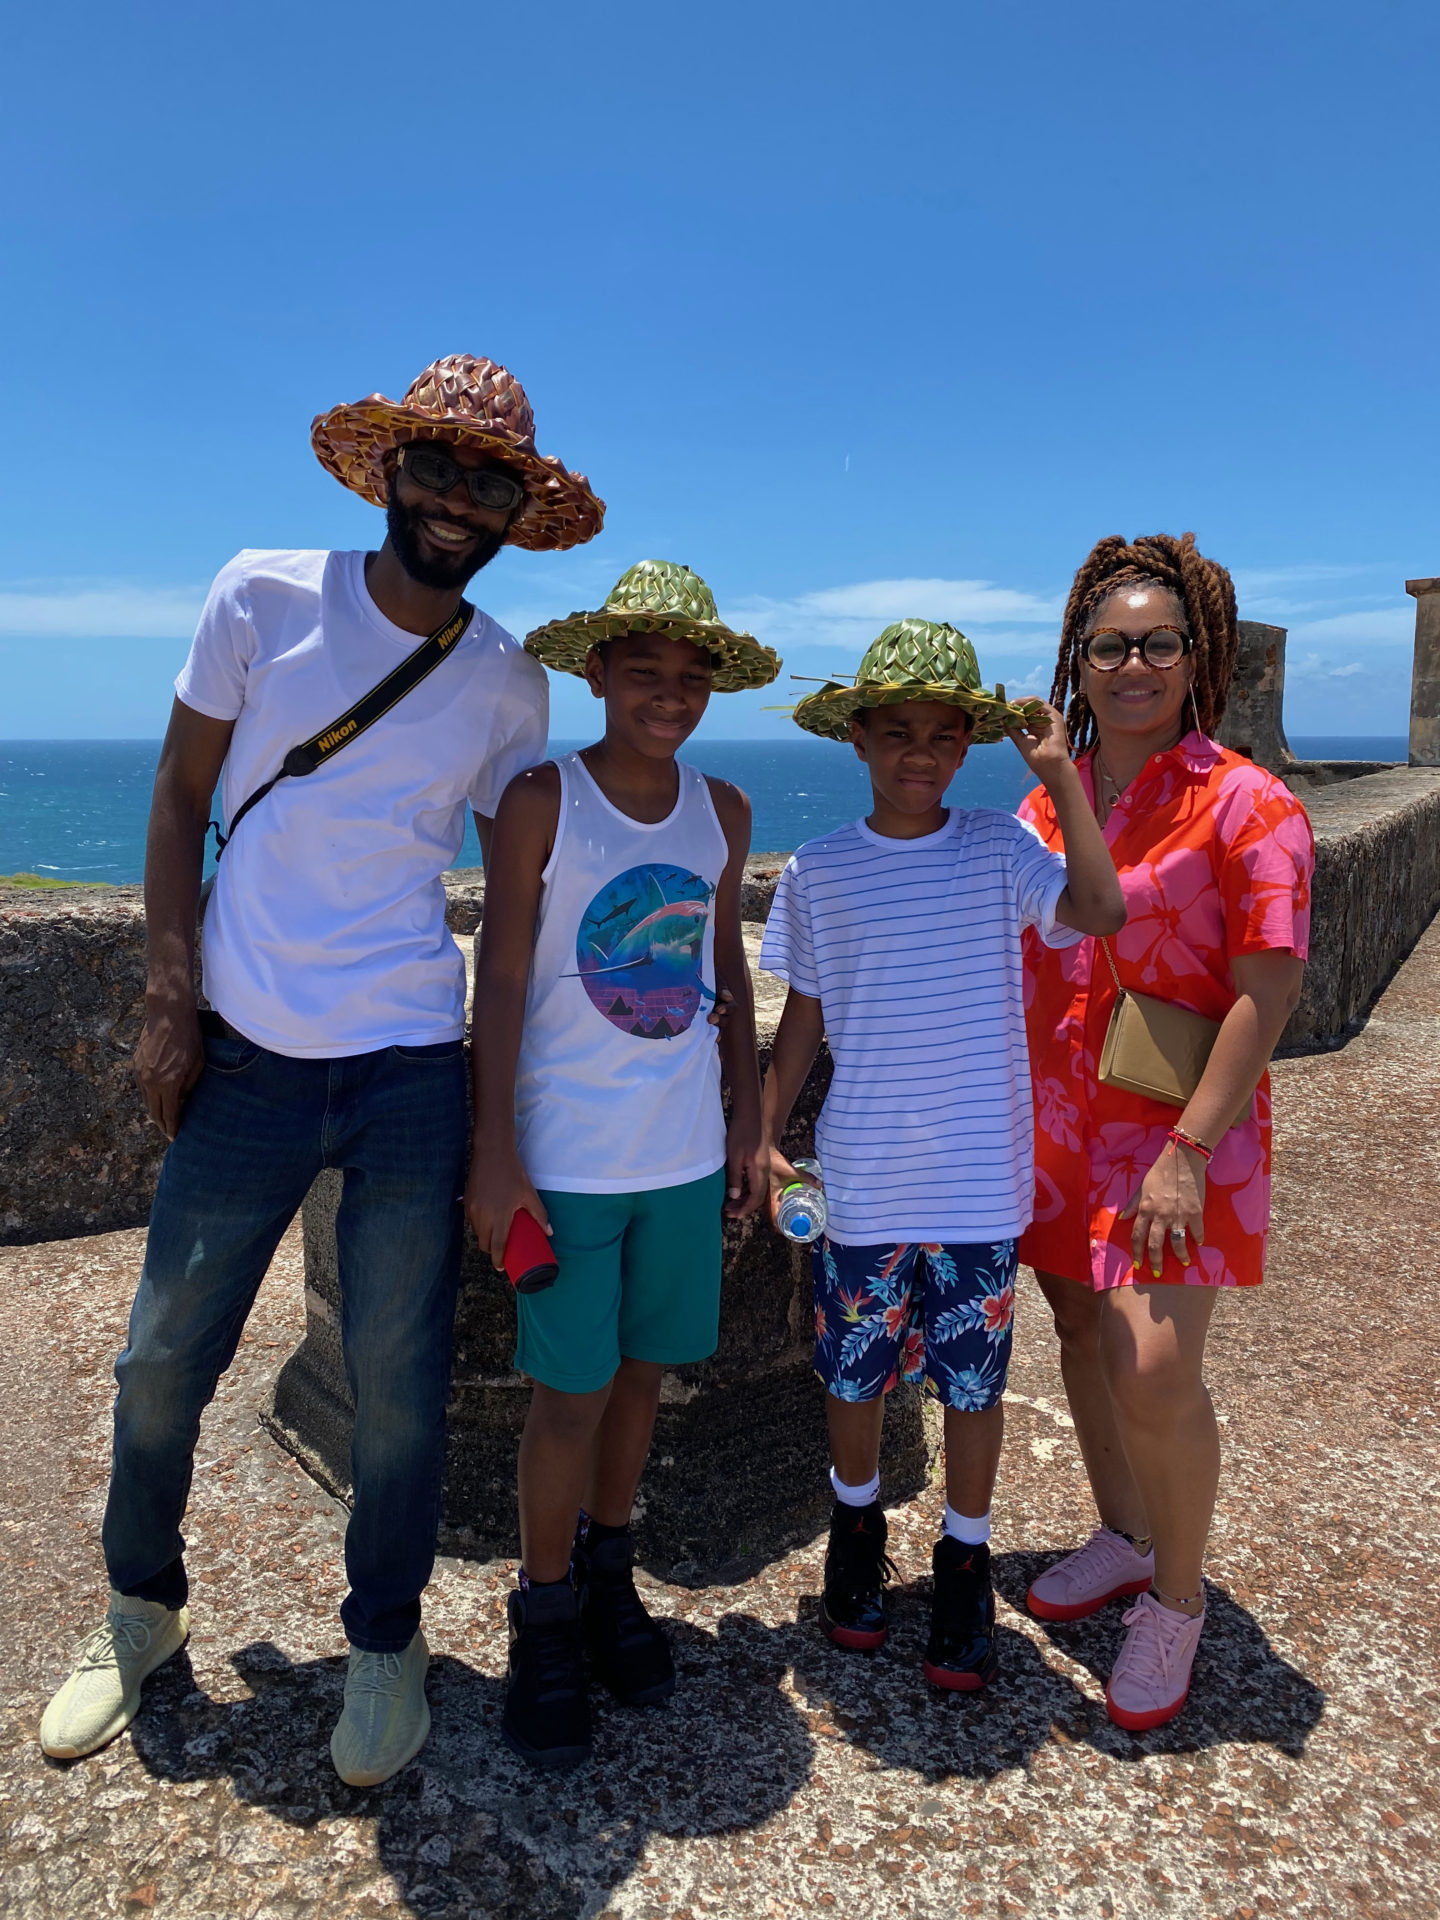 My Puerto Rico Travel Guide For Families